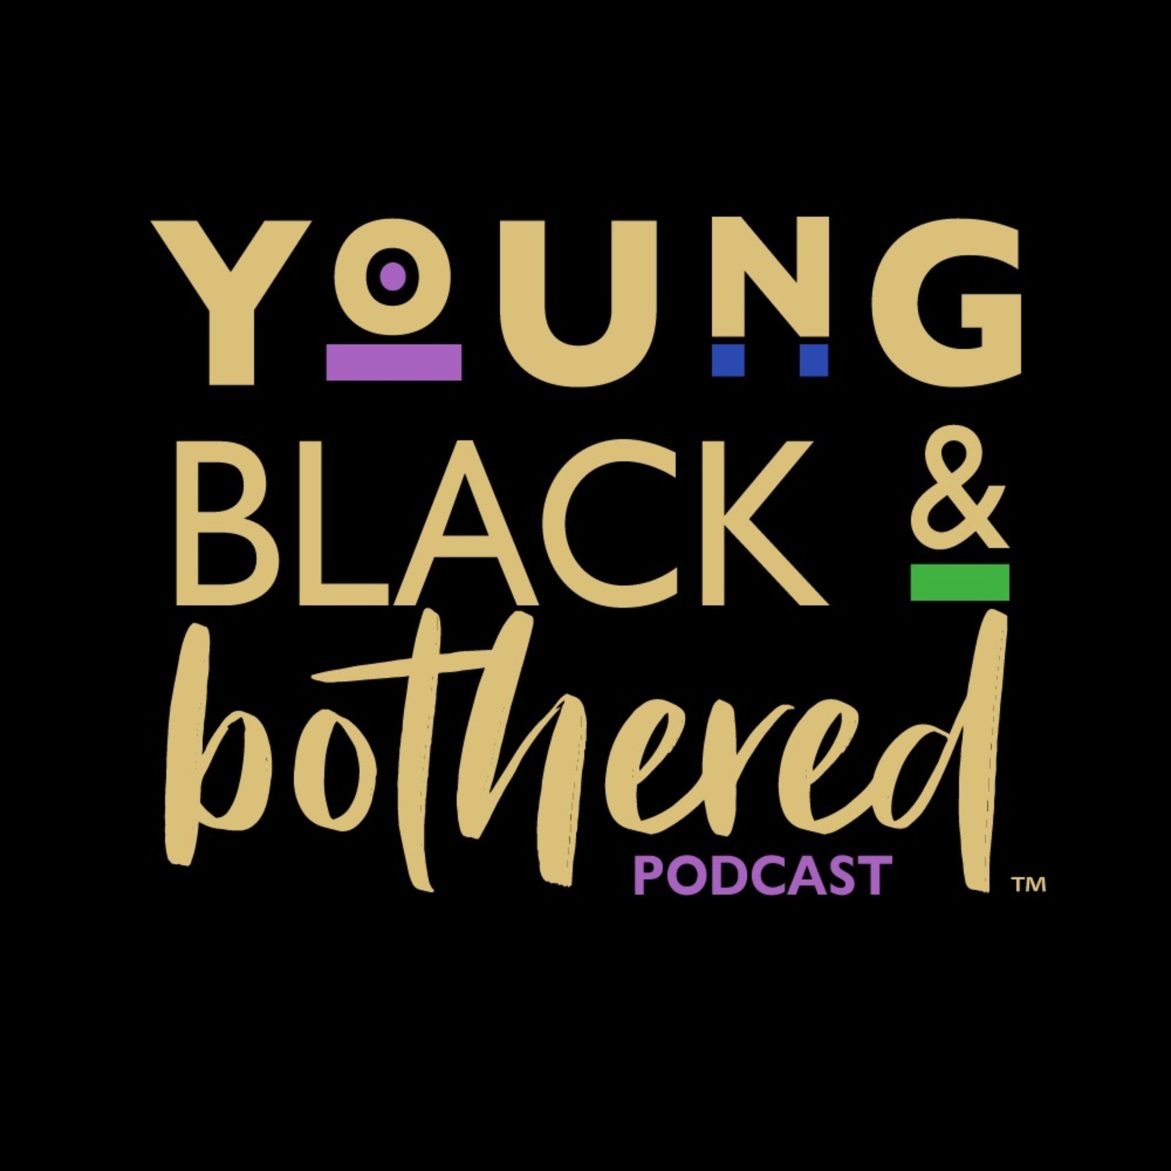 Black Podcasting - Young Black & Beautiful